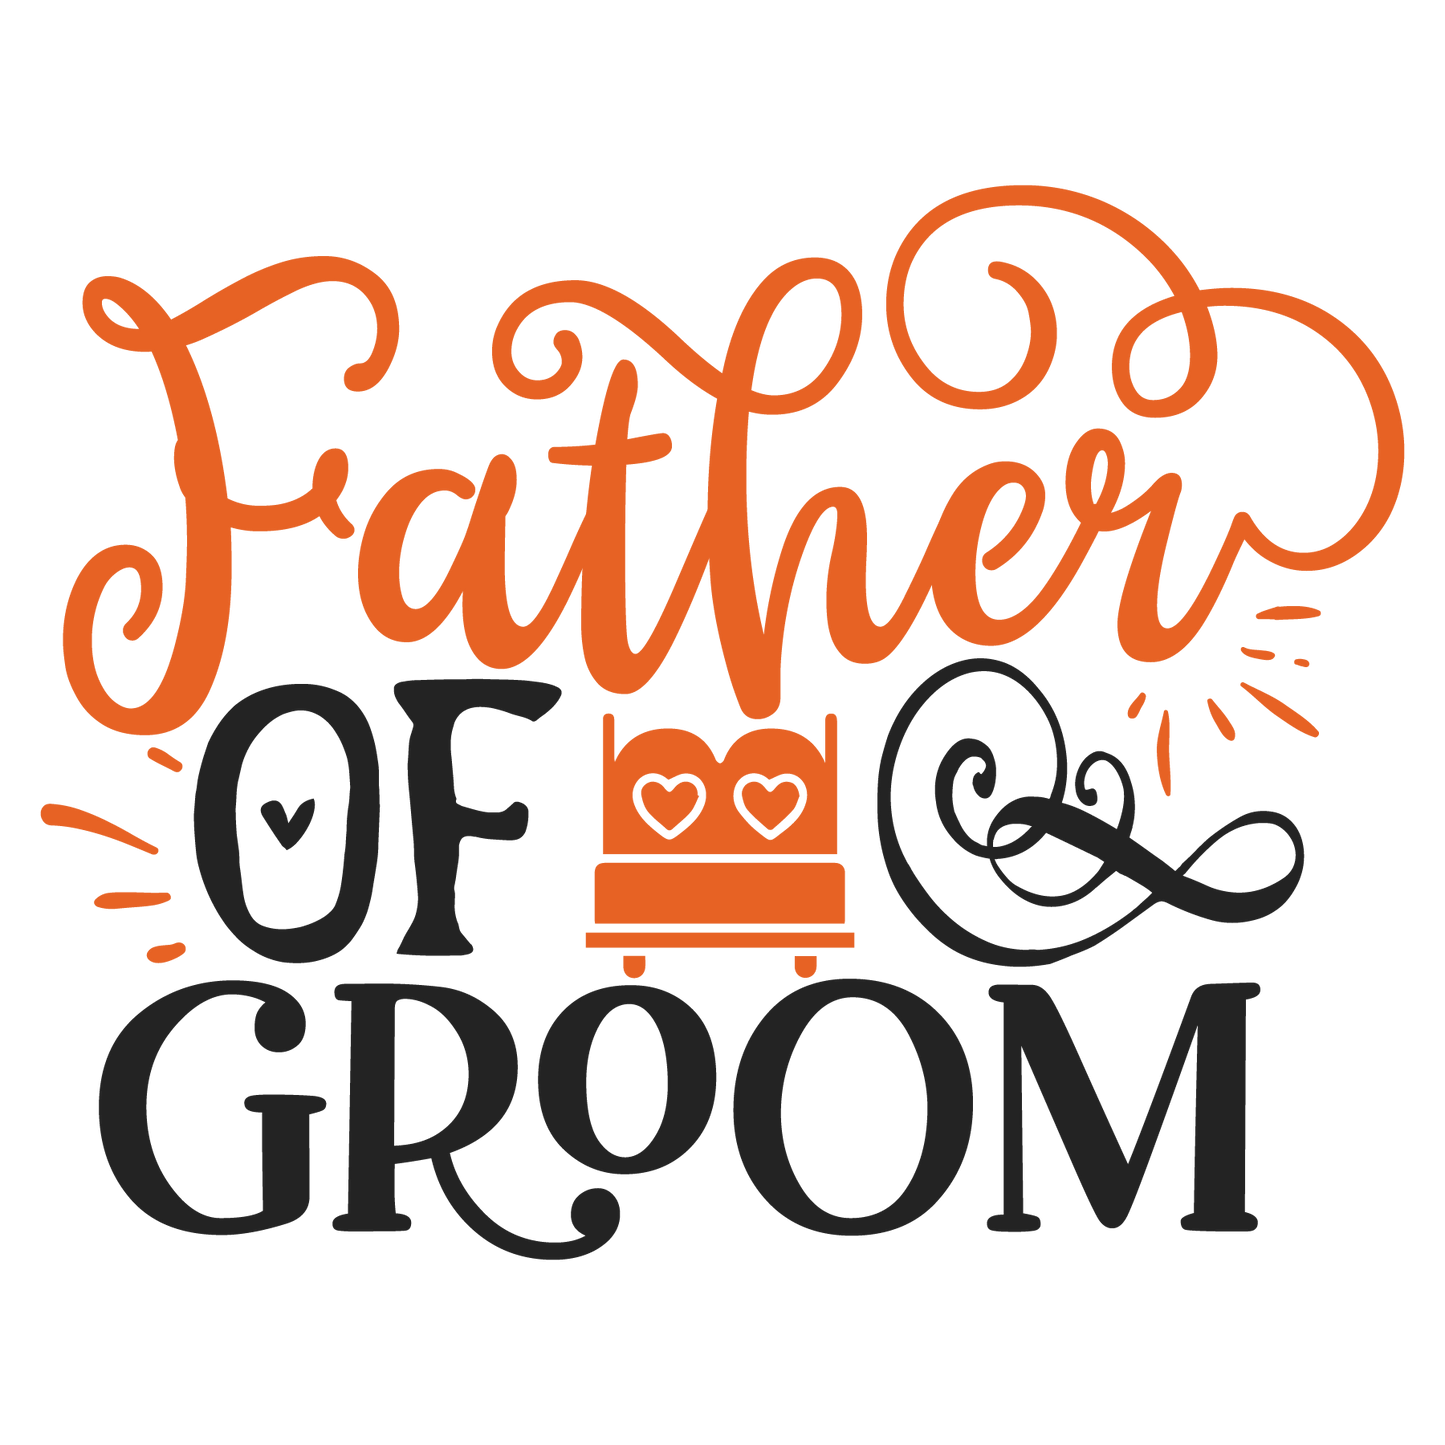 Wedding - Father Of The Groom Coffee Mug - Home of Buy 3, Get 1 Free. Long Lasting Custom Designed Coffee Mugs for Business and Pleasure. Perfect for Christmas, Housewarming, Wedding Party gifts